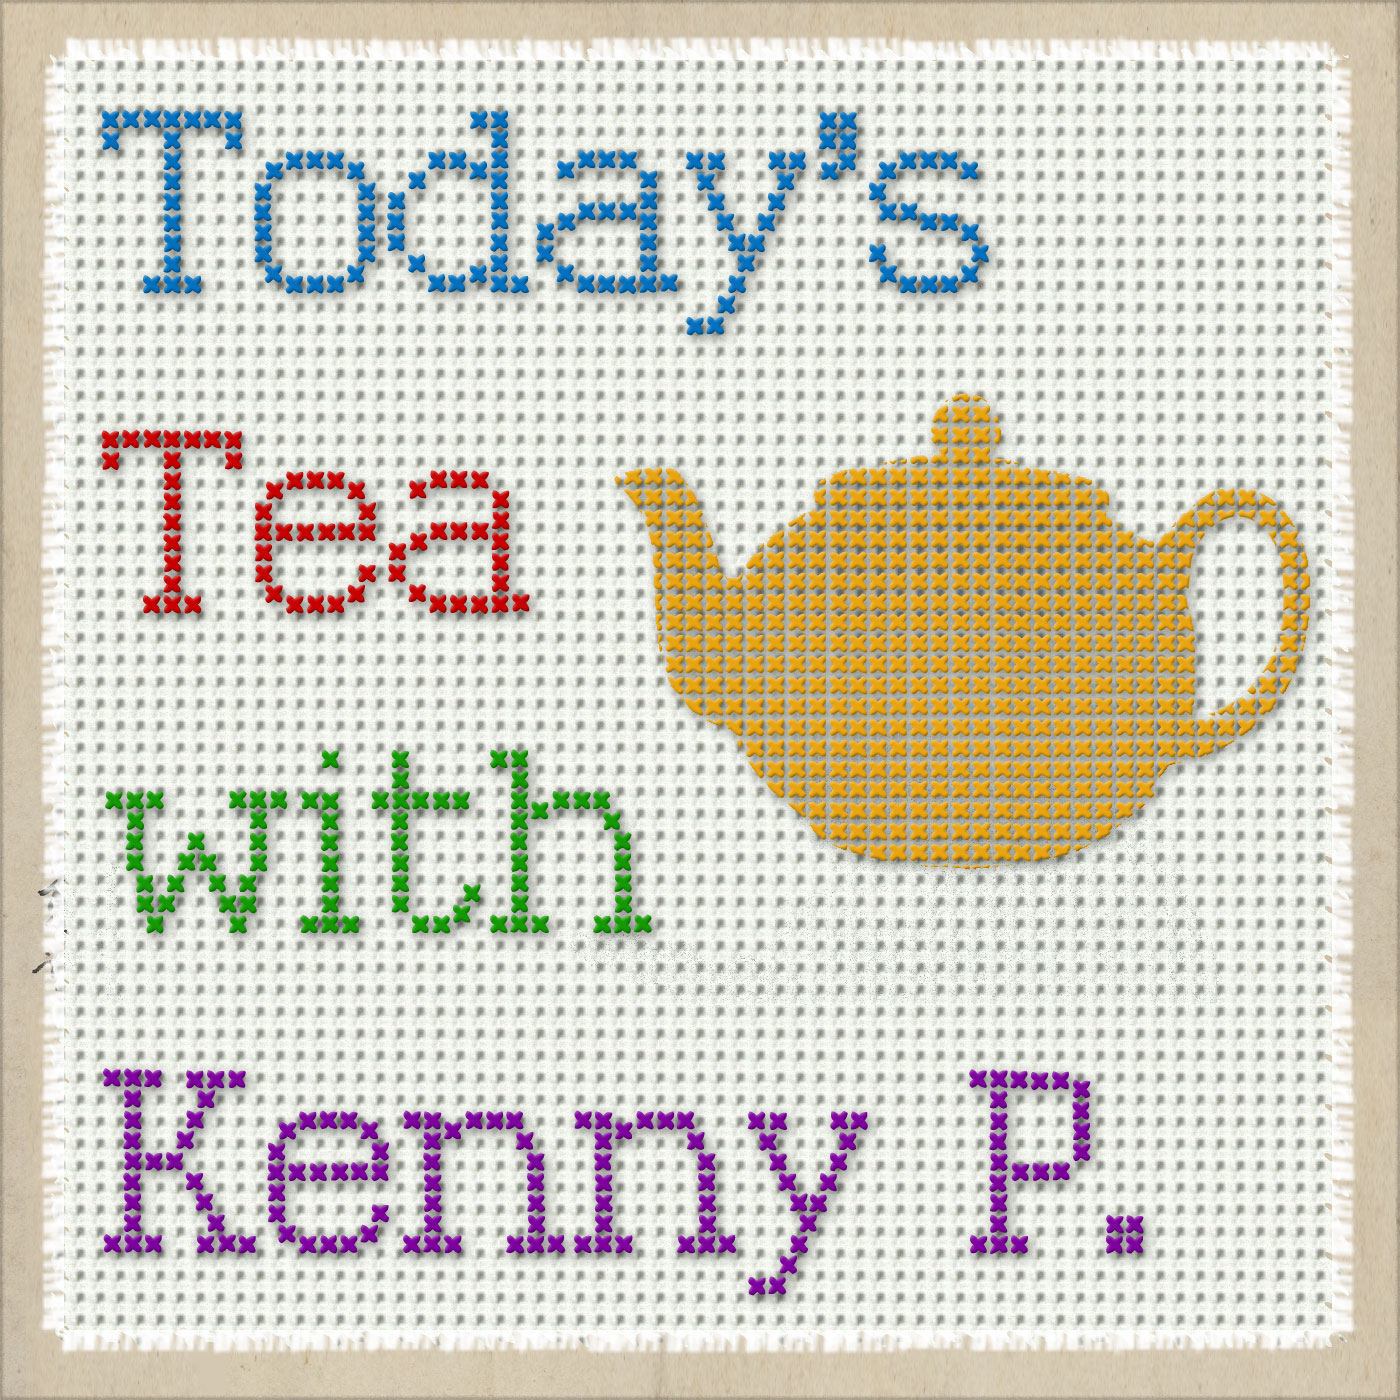 Today's Tea with Kenny P. - a comedy podcast